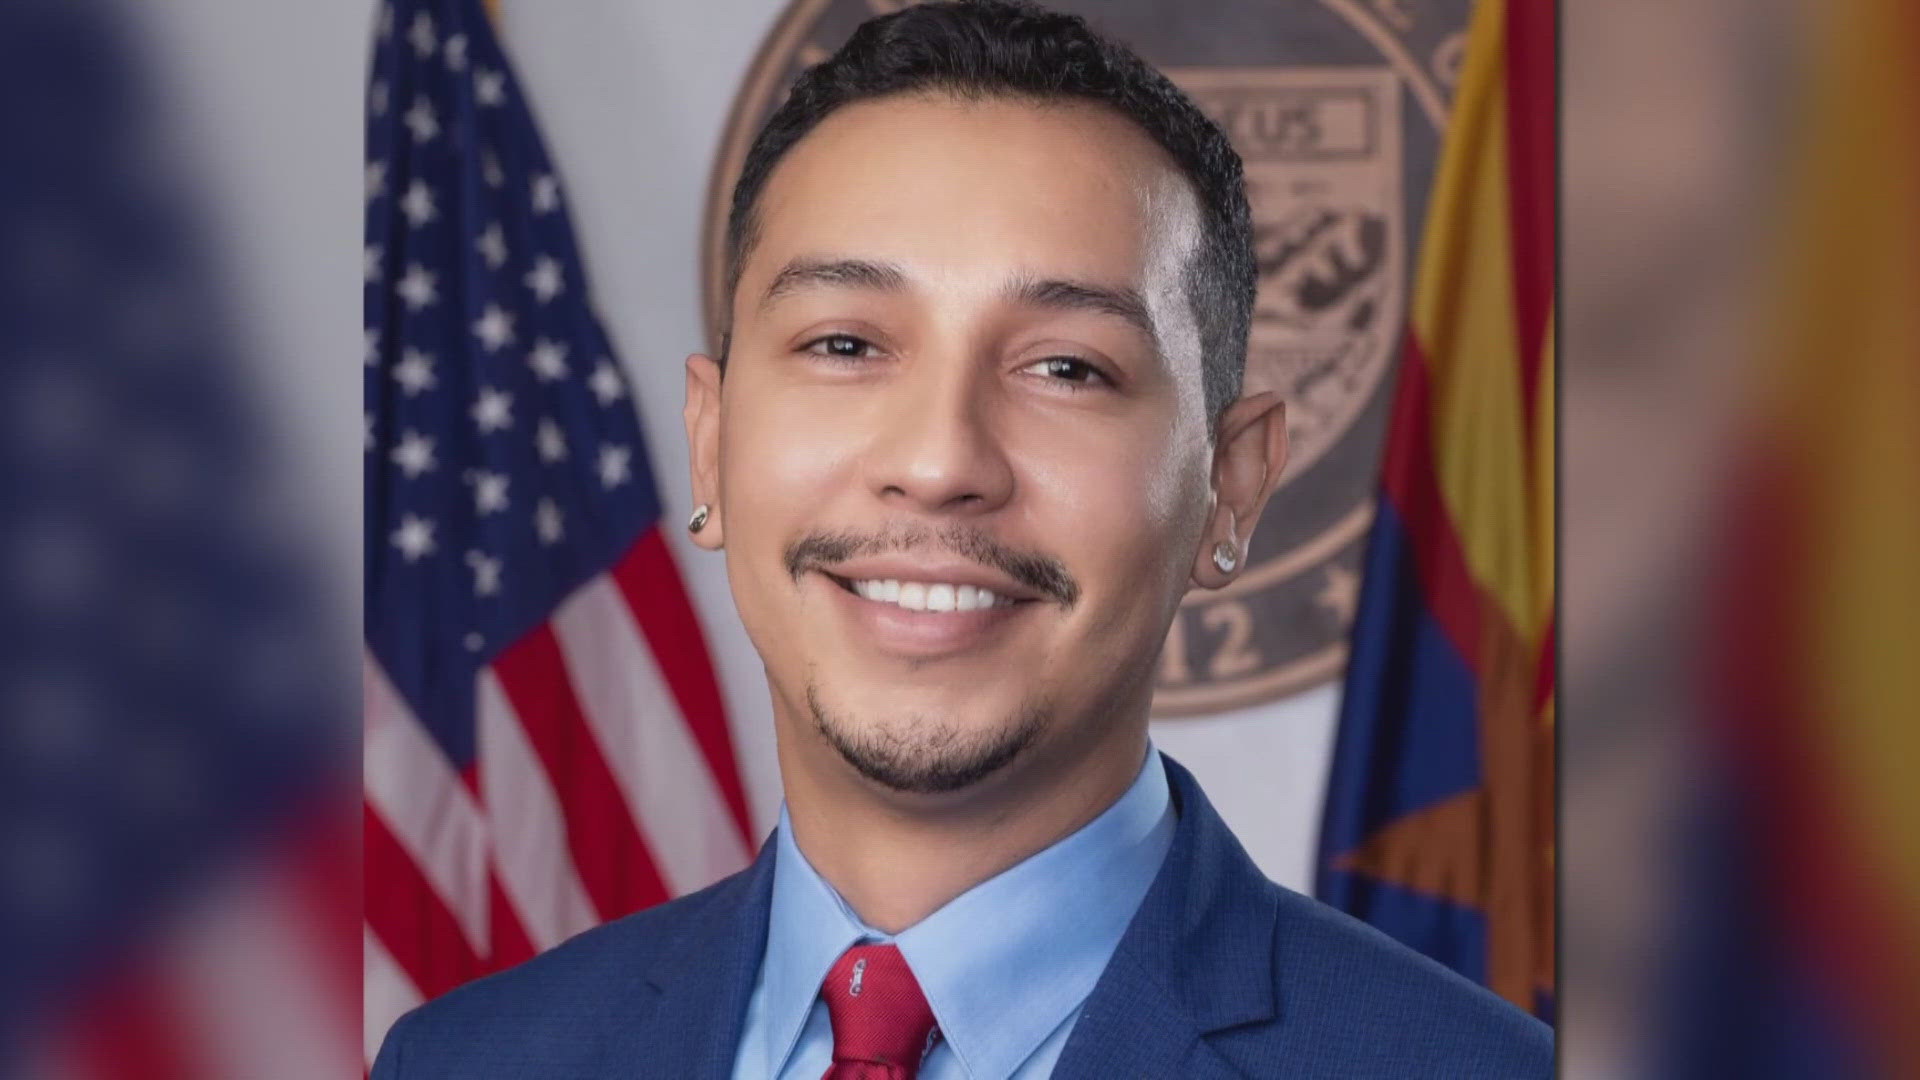 The Phoenix democrat was charged with molesting a teenage boy.